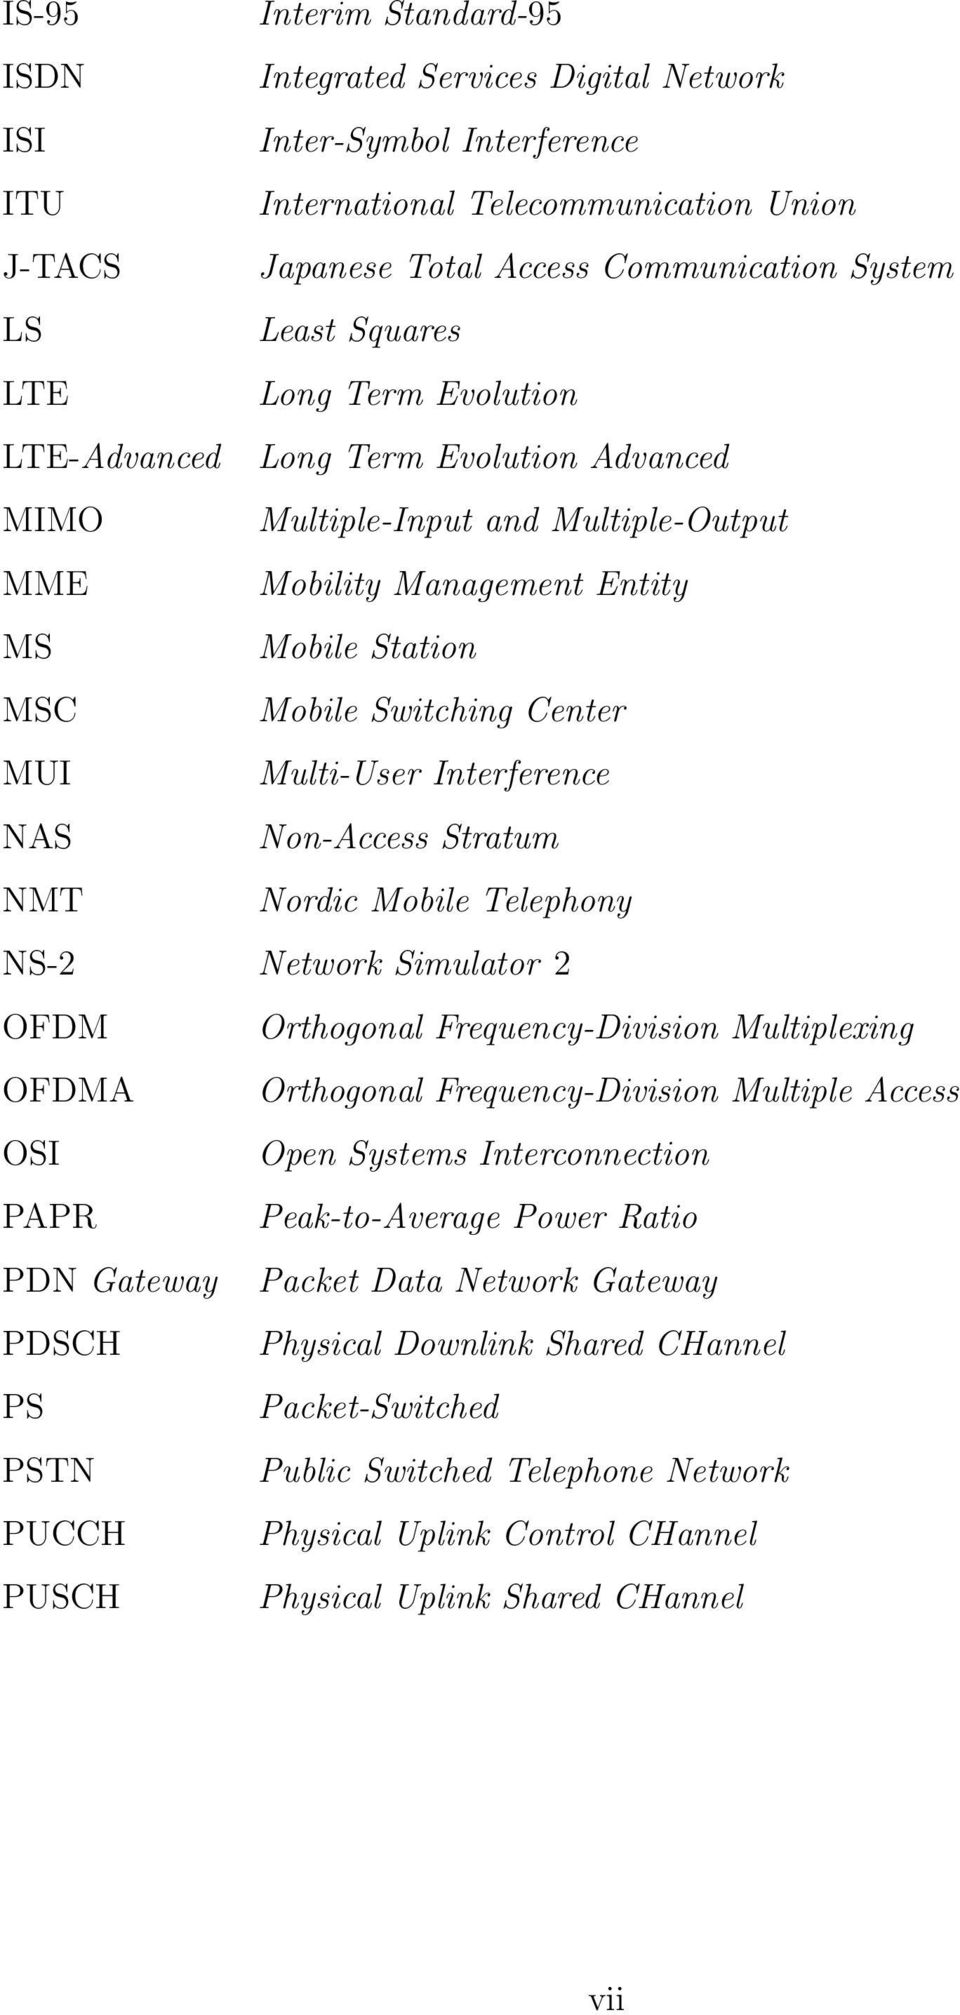 Multi-User Interference NAS Non-Access Stratum NMT Nordic Mobile Telephony NS-2 Network Simulator 2 OFDM Orthogonal Frequency-Division Multiplexing OFDMA Orthogonal Frequency-Division Multiple Access